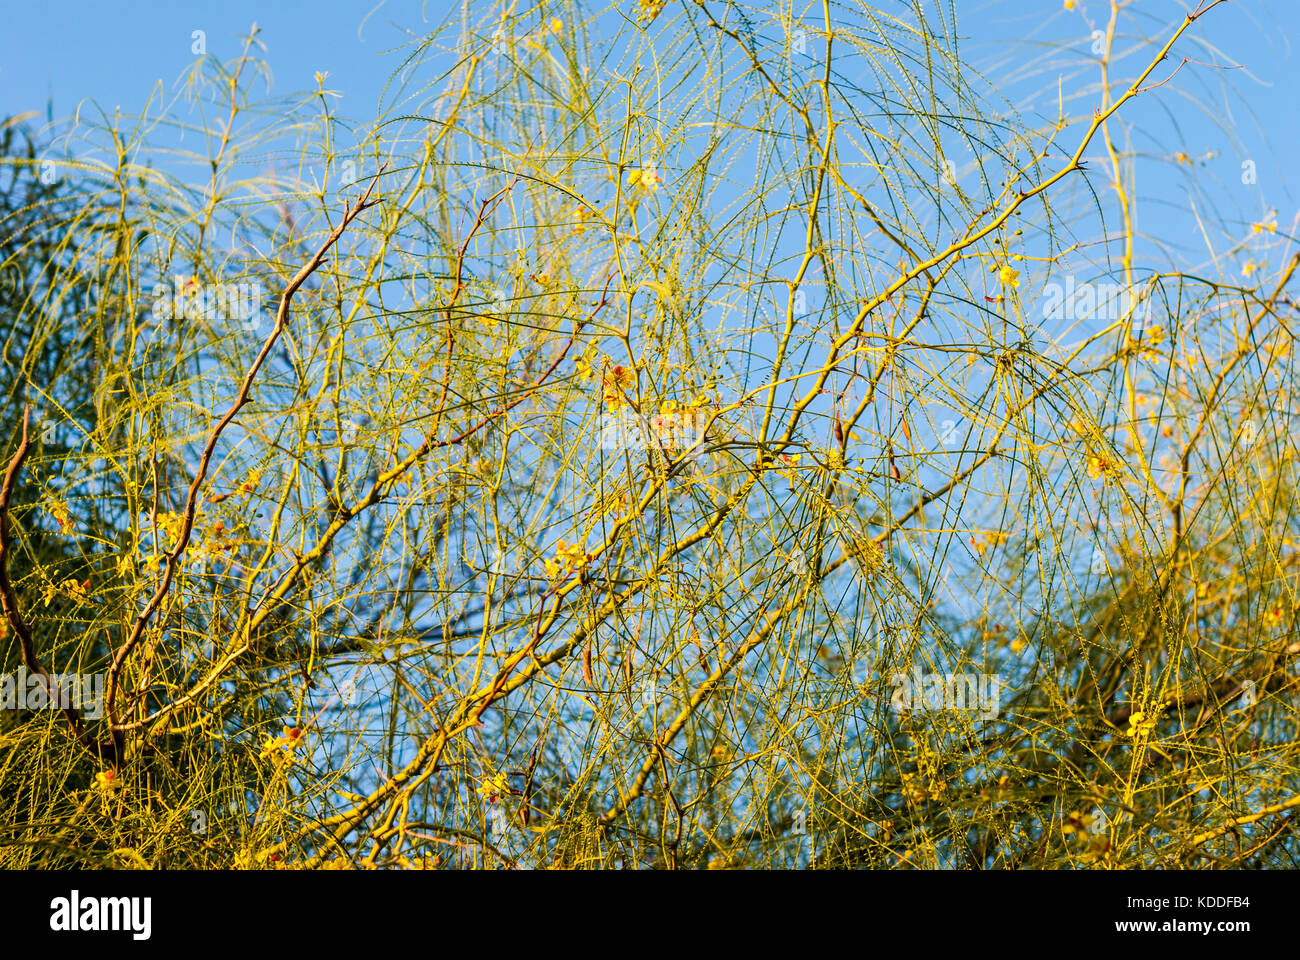 Desert Museum Palo Verde tree branches with flowers and blue sky background close-up Stock Photo